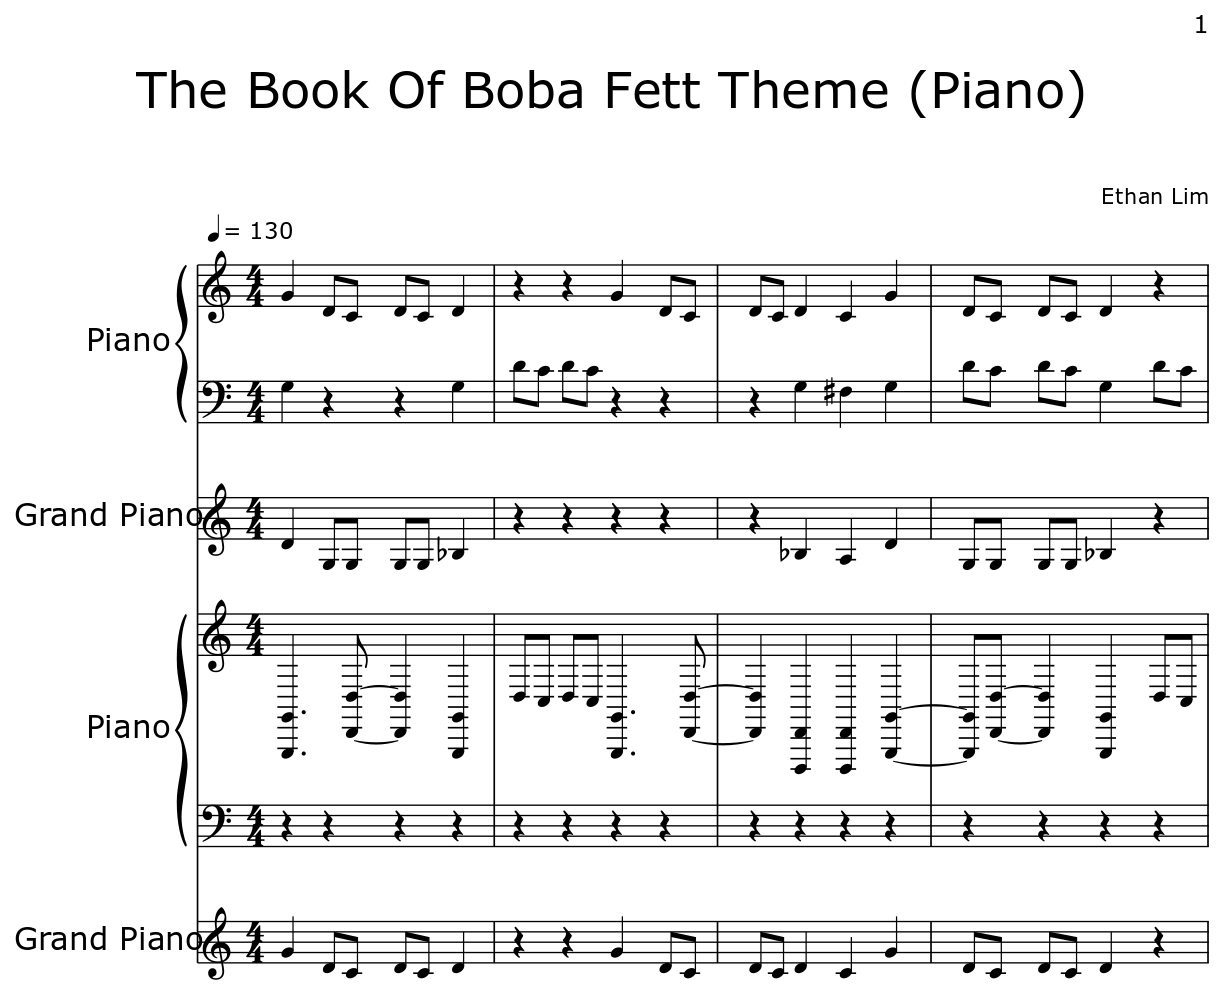 The Book Of Boba Fett Theme (Piano) - Sheet music for Piano